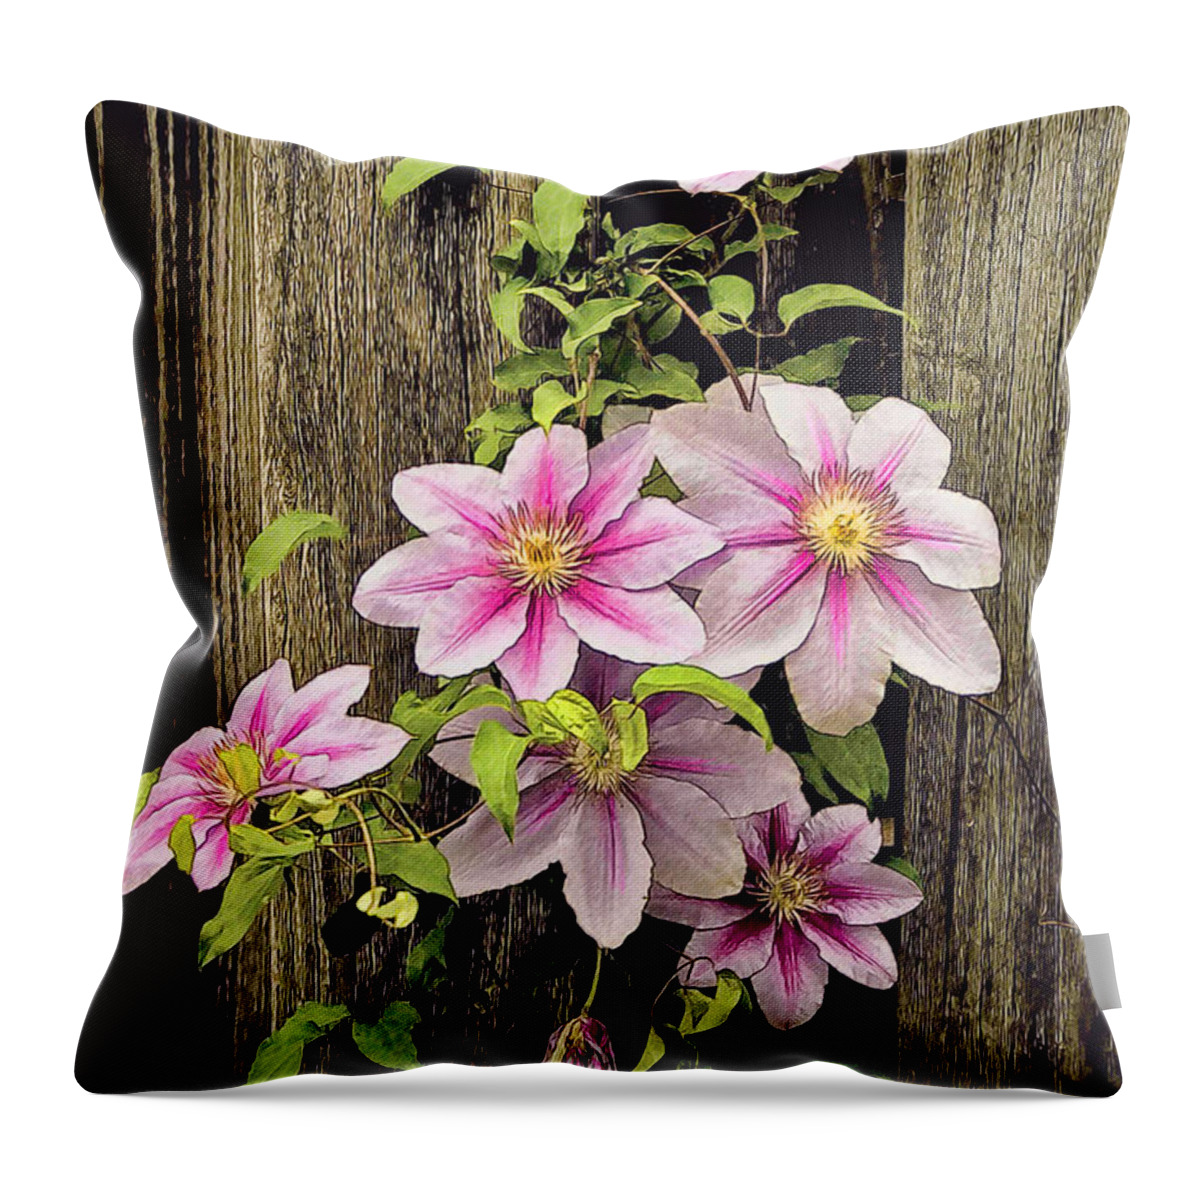 Flower Throw Pillow featuring the photograph Climatis Flowering Vine by Bonnie Willis